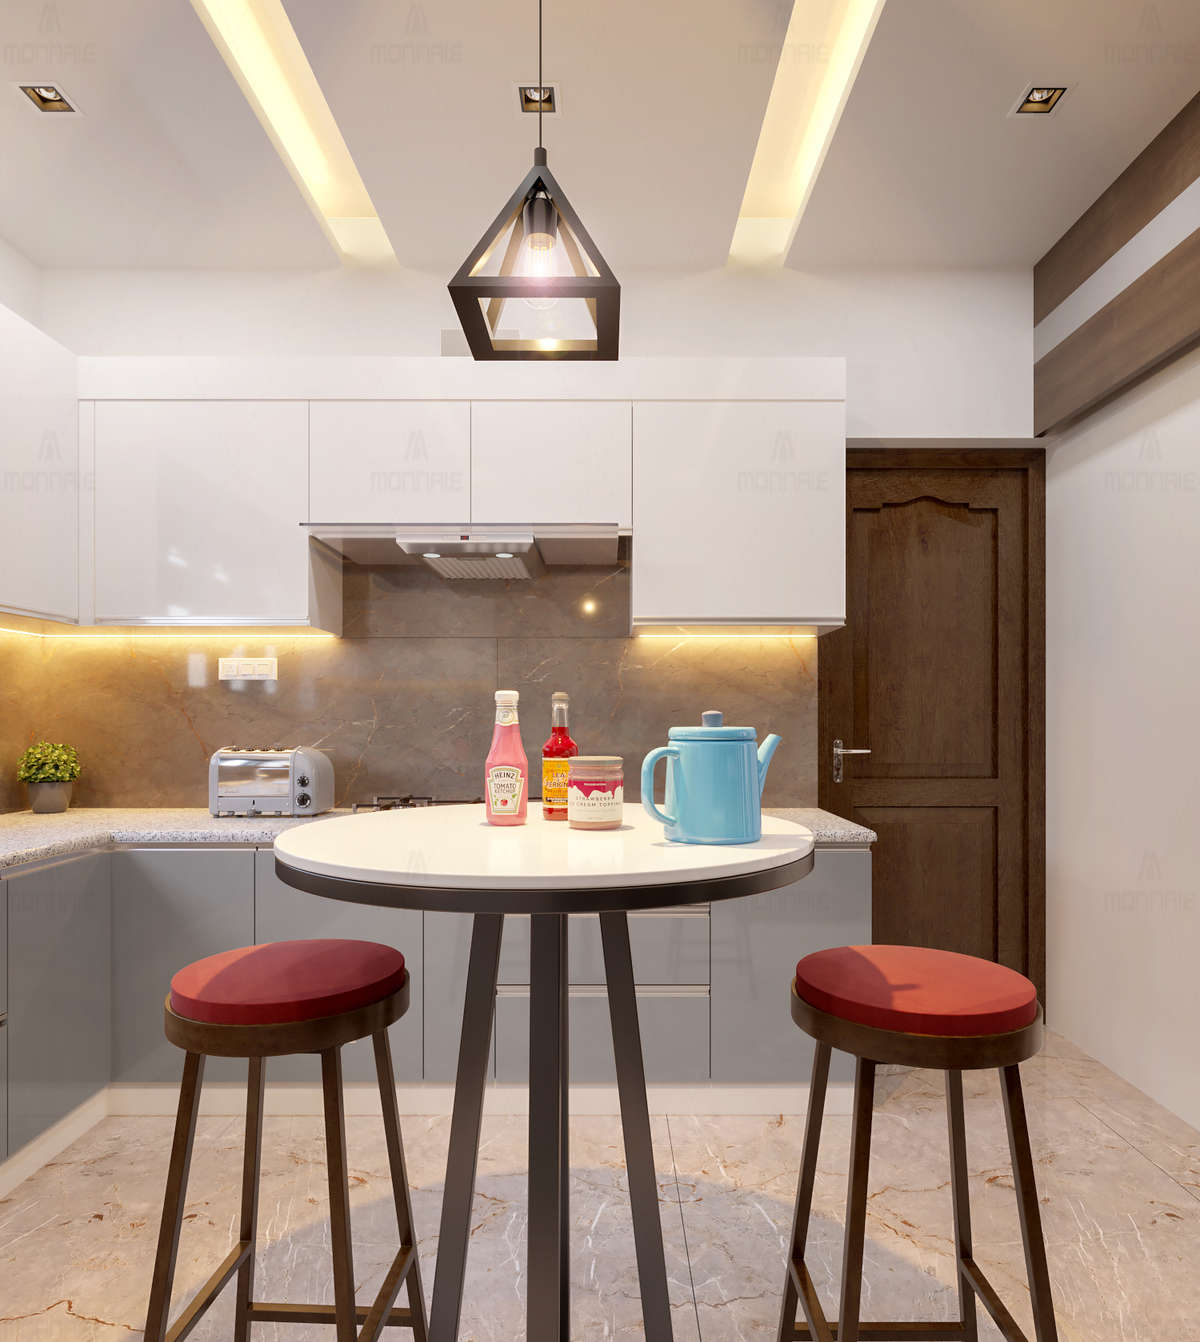 Ceiling, Kitchen, Lighting, Storage Designs by Architect Monnaie Architects And Interiors, Palakkad | Kolo